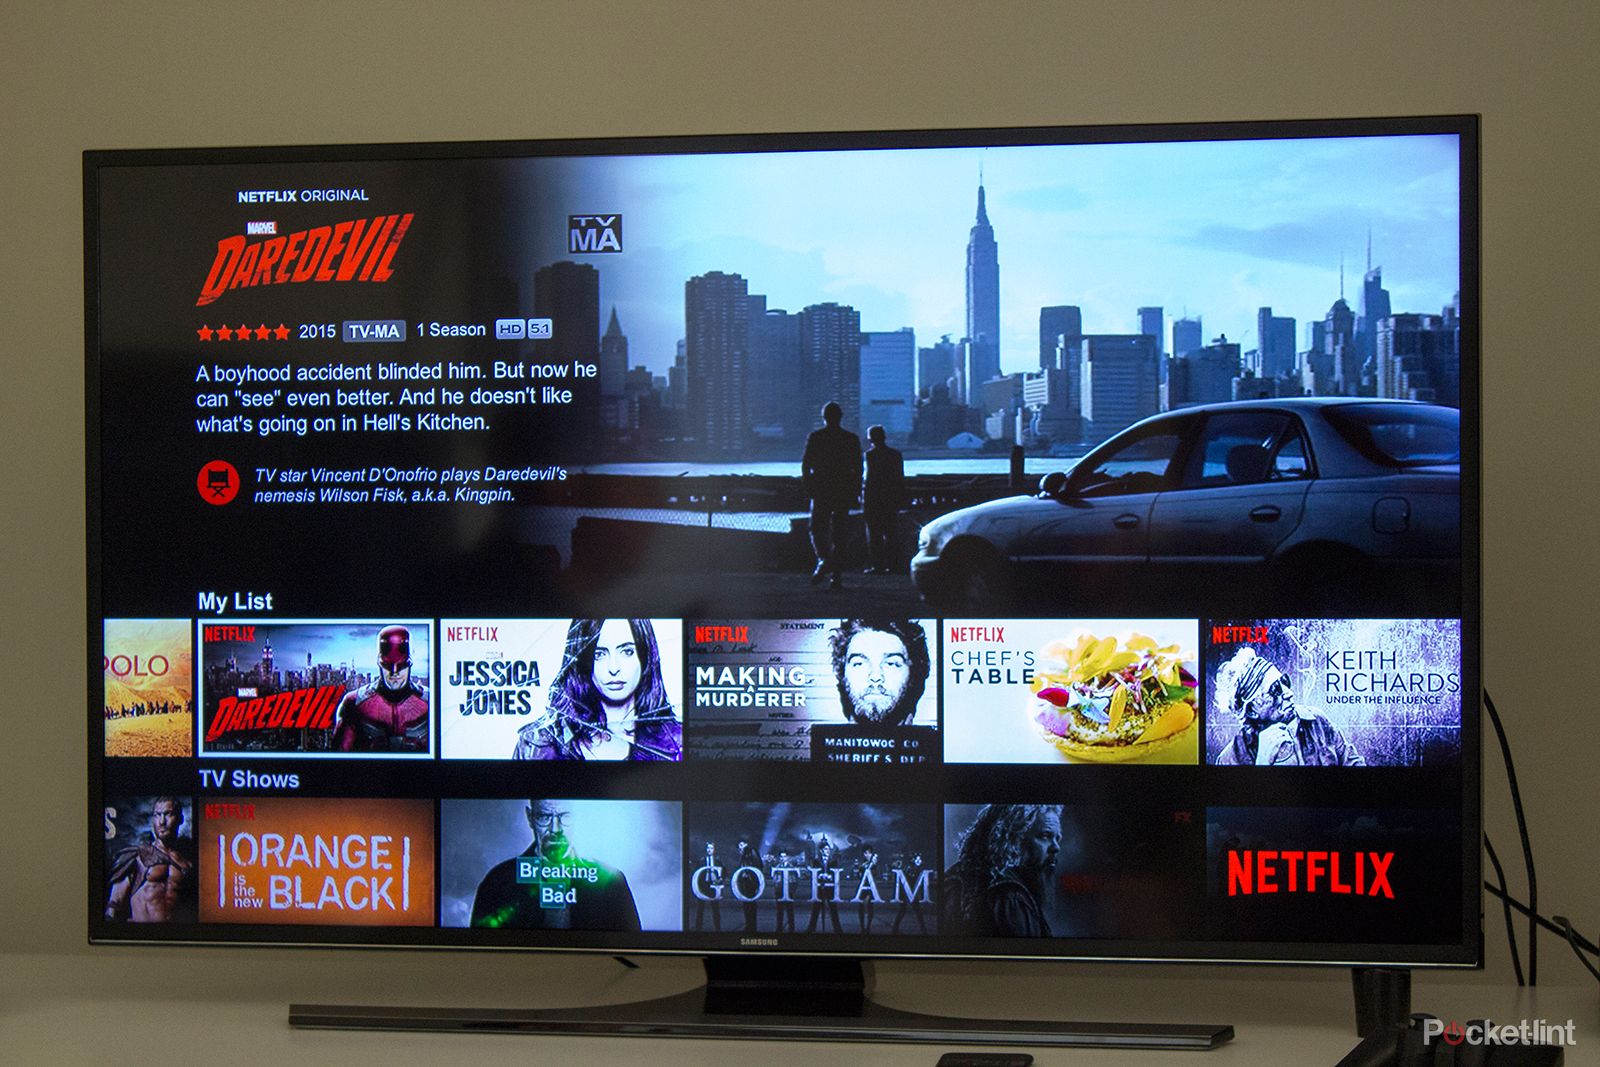 netflix second screen and mobile data limiter coming this year hdr launch show revealed image 2